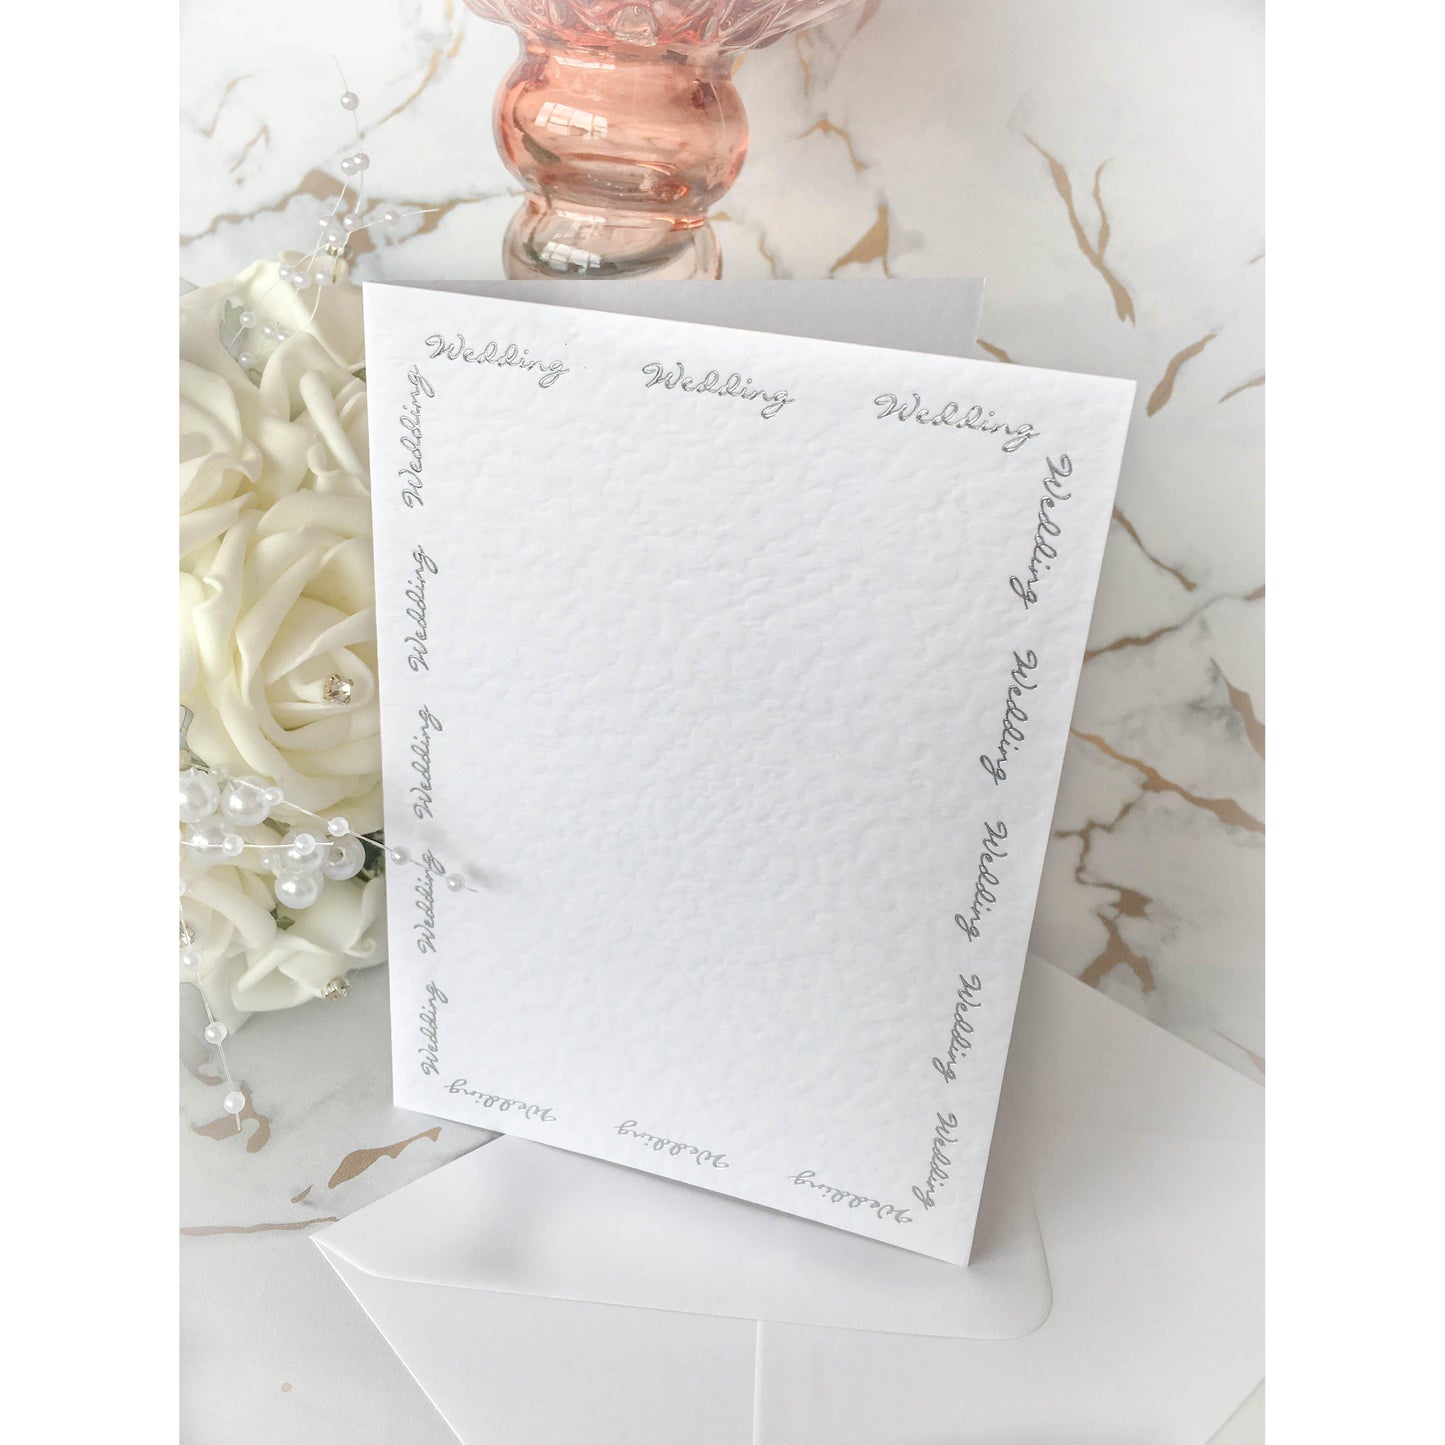 A6 Card Blanks White Hammer Effect With Silver Foil Wedding Script 10pk - Clearance-The Creative Bride